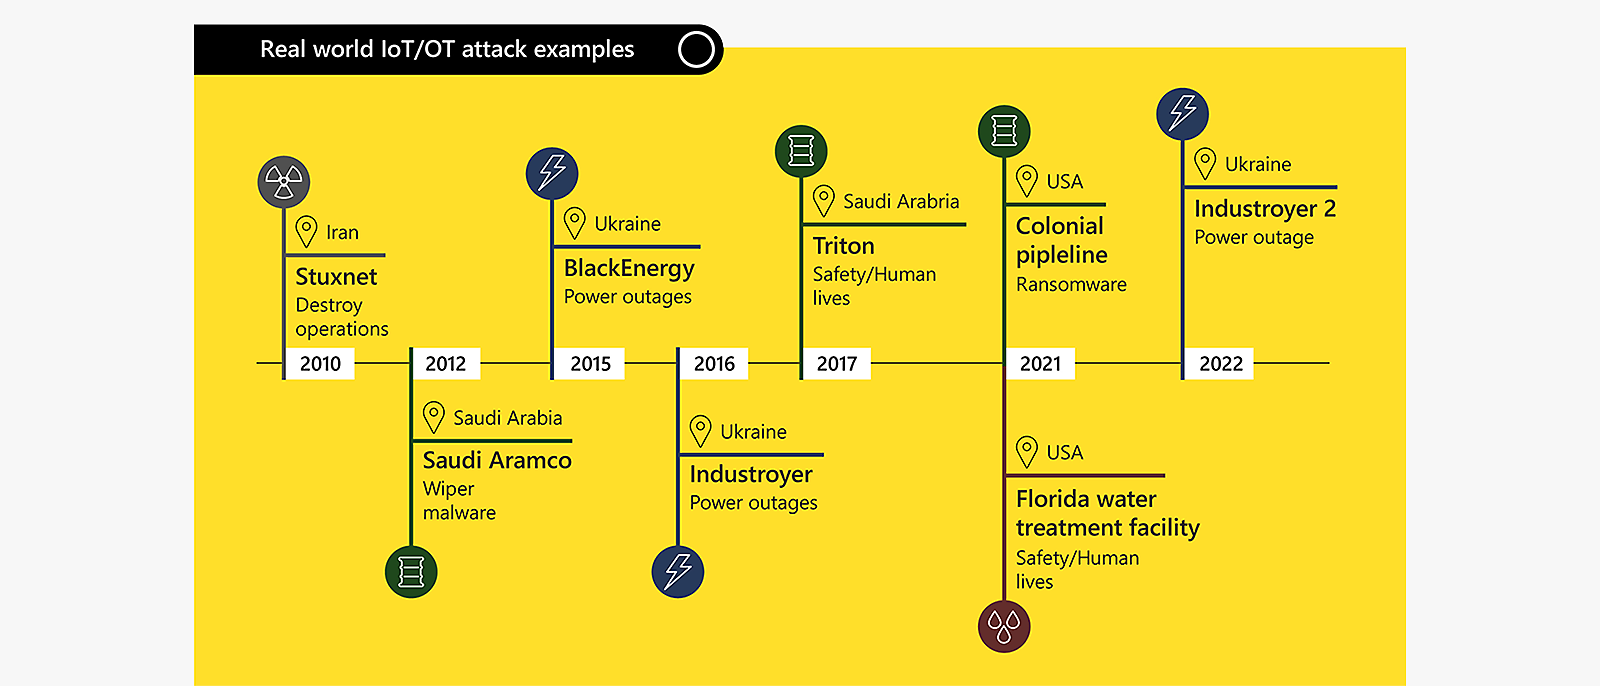 Chart showing real world IoT/OT attack examples for 2010, 2012, 2015, 2016, 2017, 2021 and 2022. 